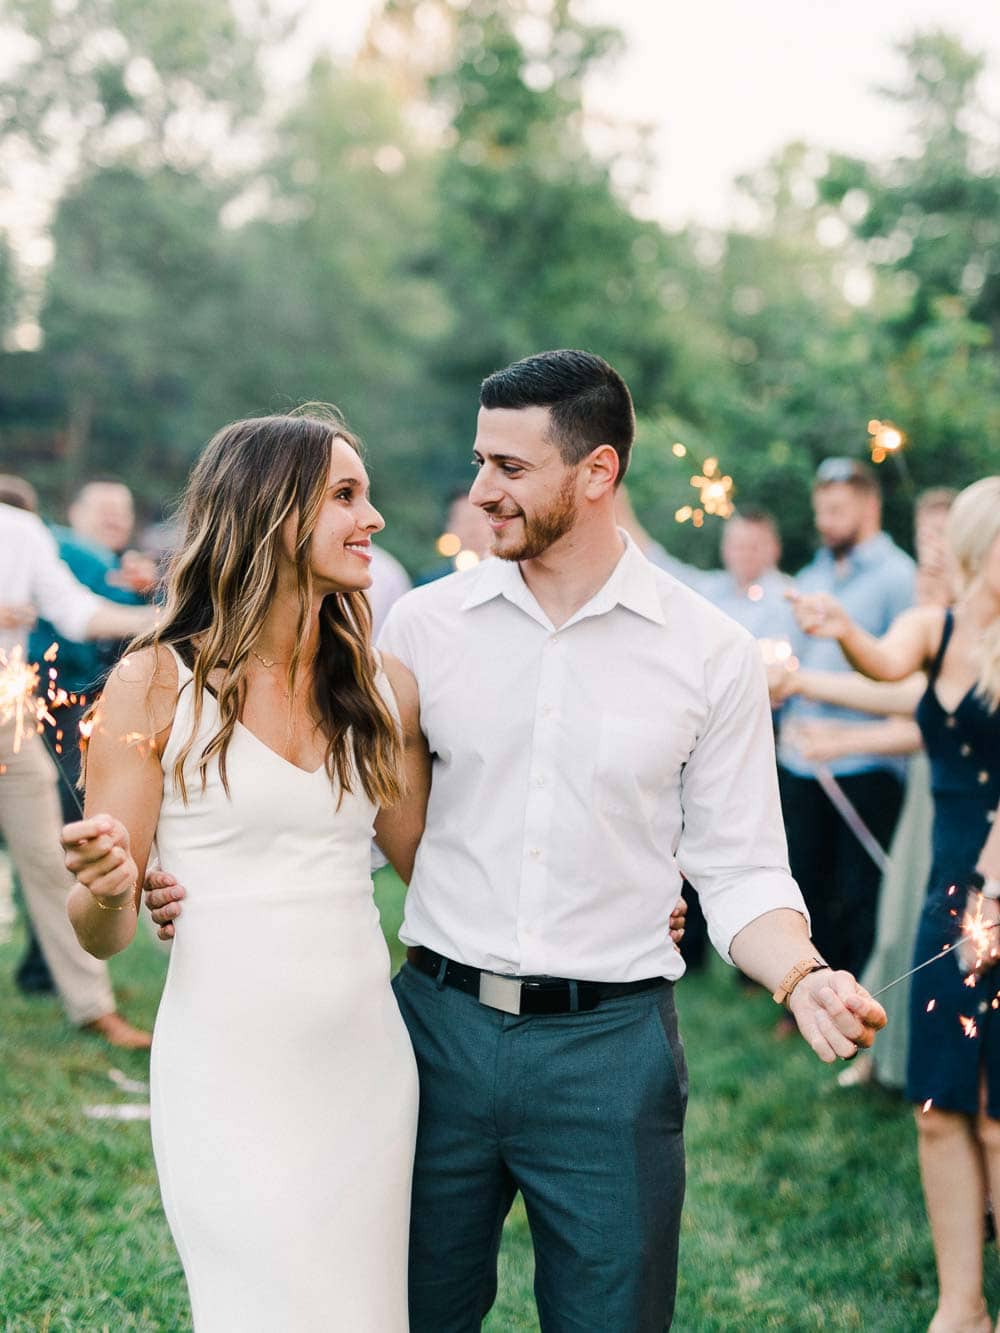 bride and groom portraits with sparklers during their intimate backyard wedding in cleveland Ohio